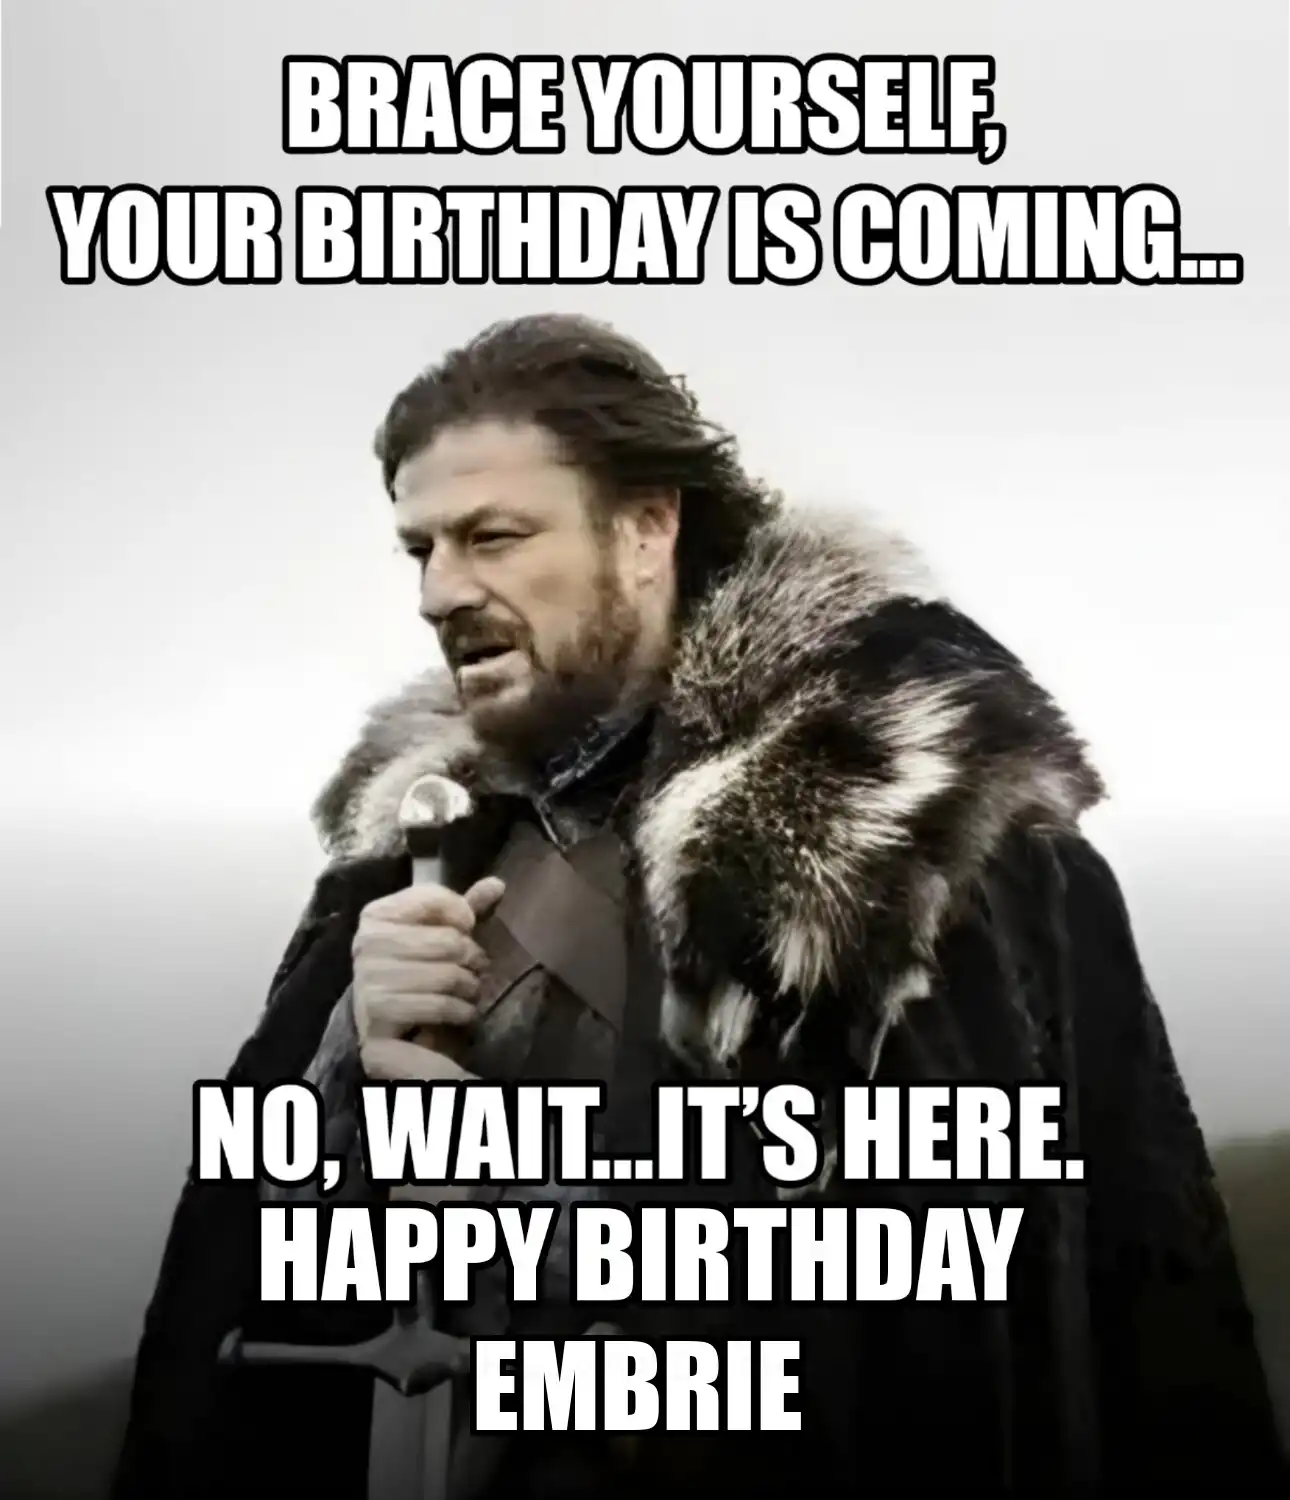 Happy Birthday Embrie Brace Yourself Your Birthday Is Coming Meme